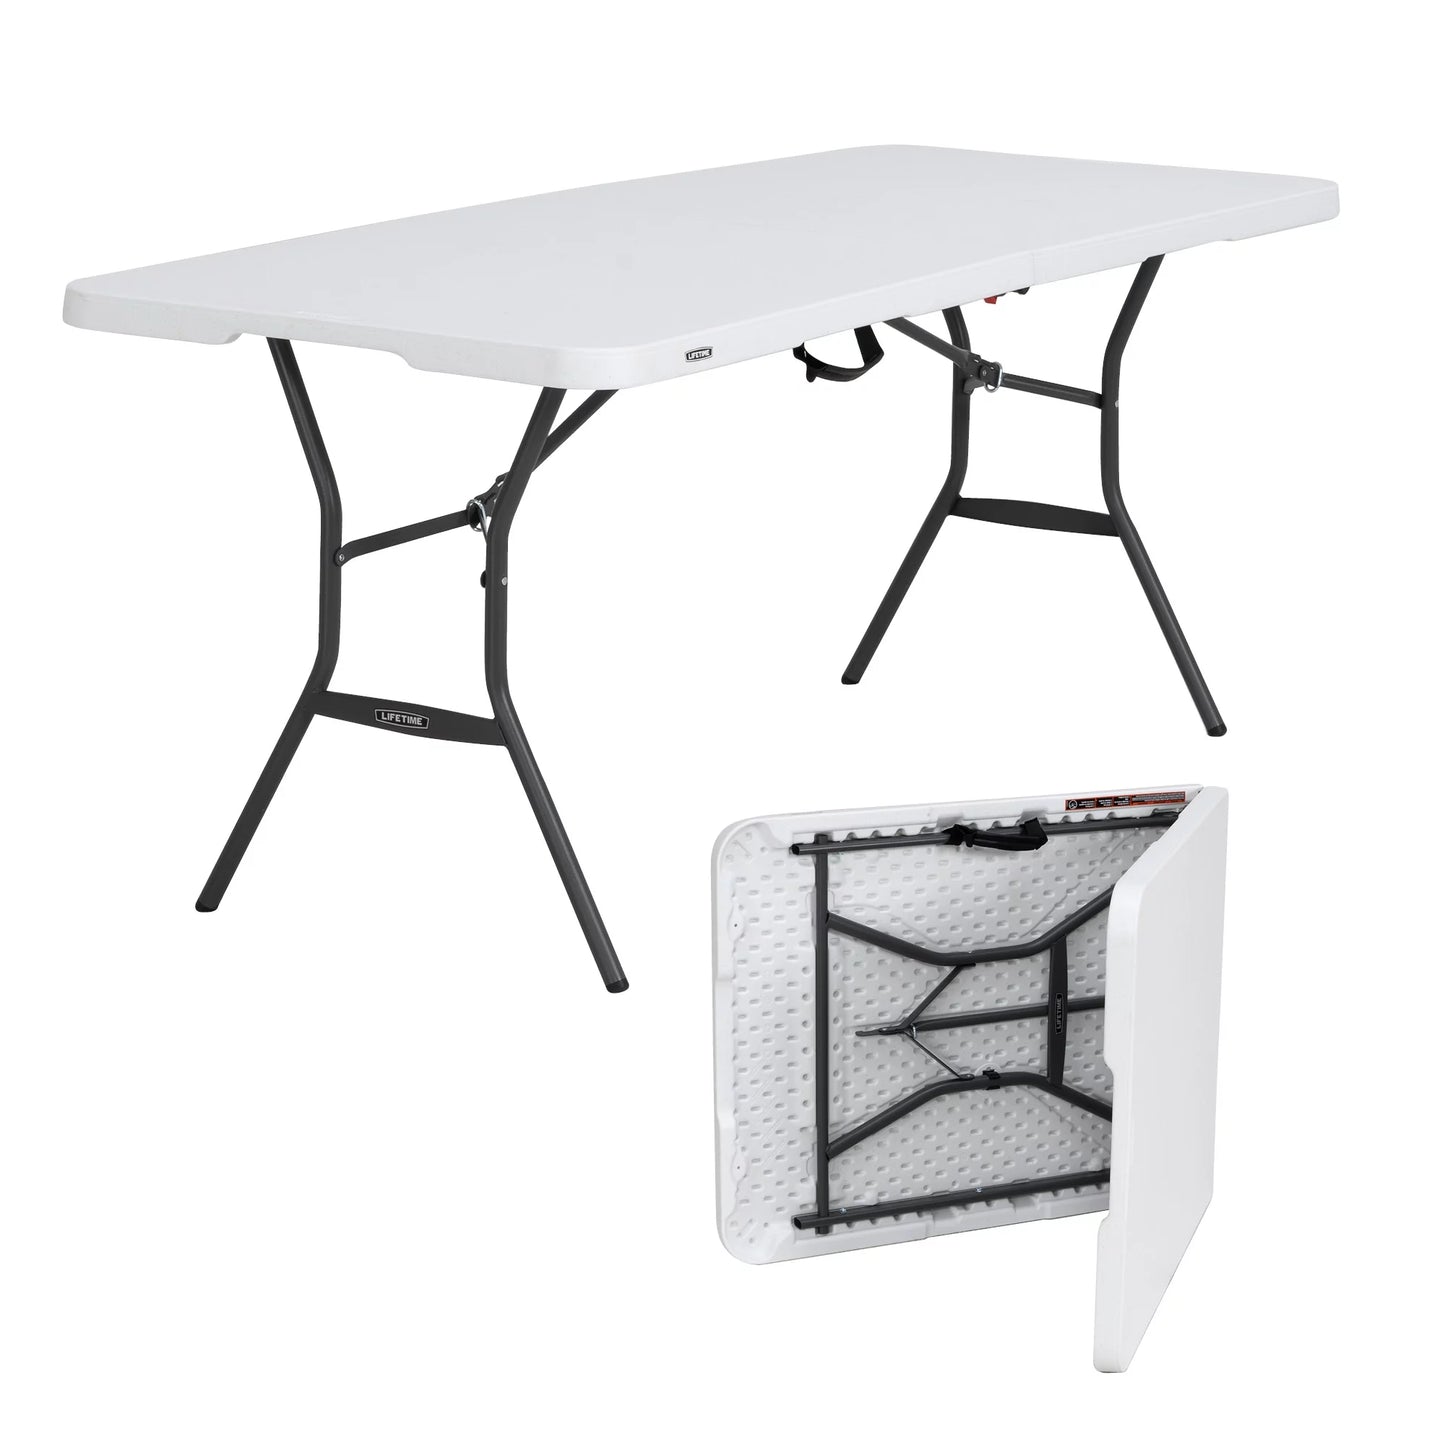 6 Ft Rectangle Folding Party Table